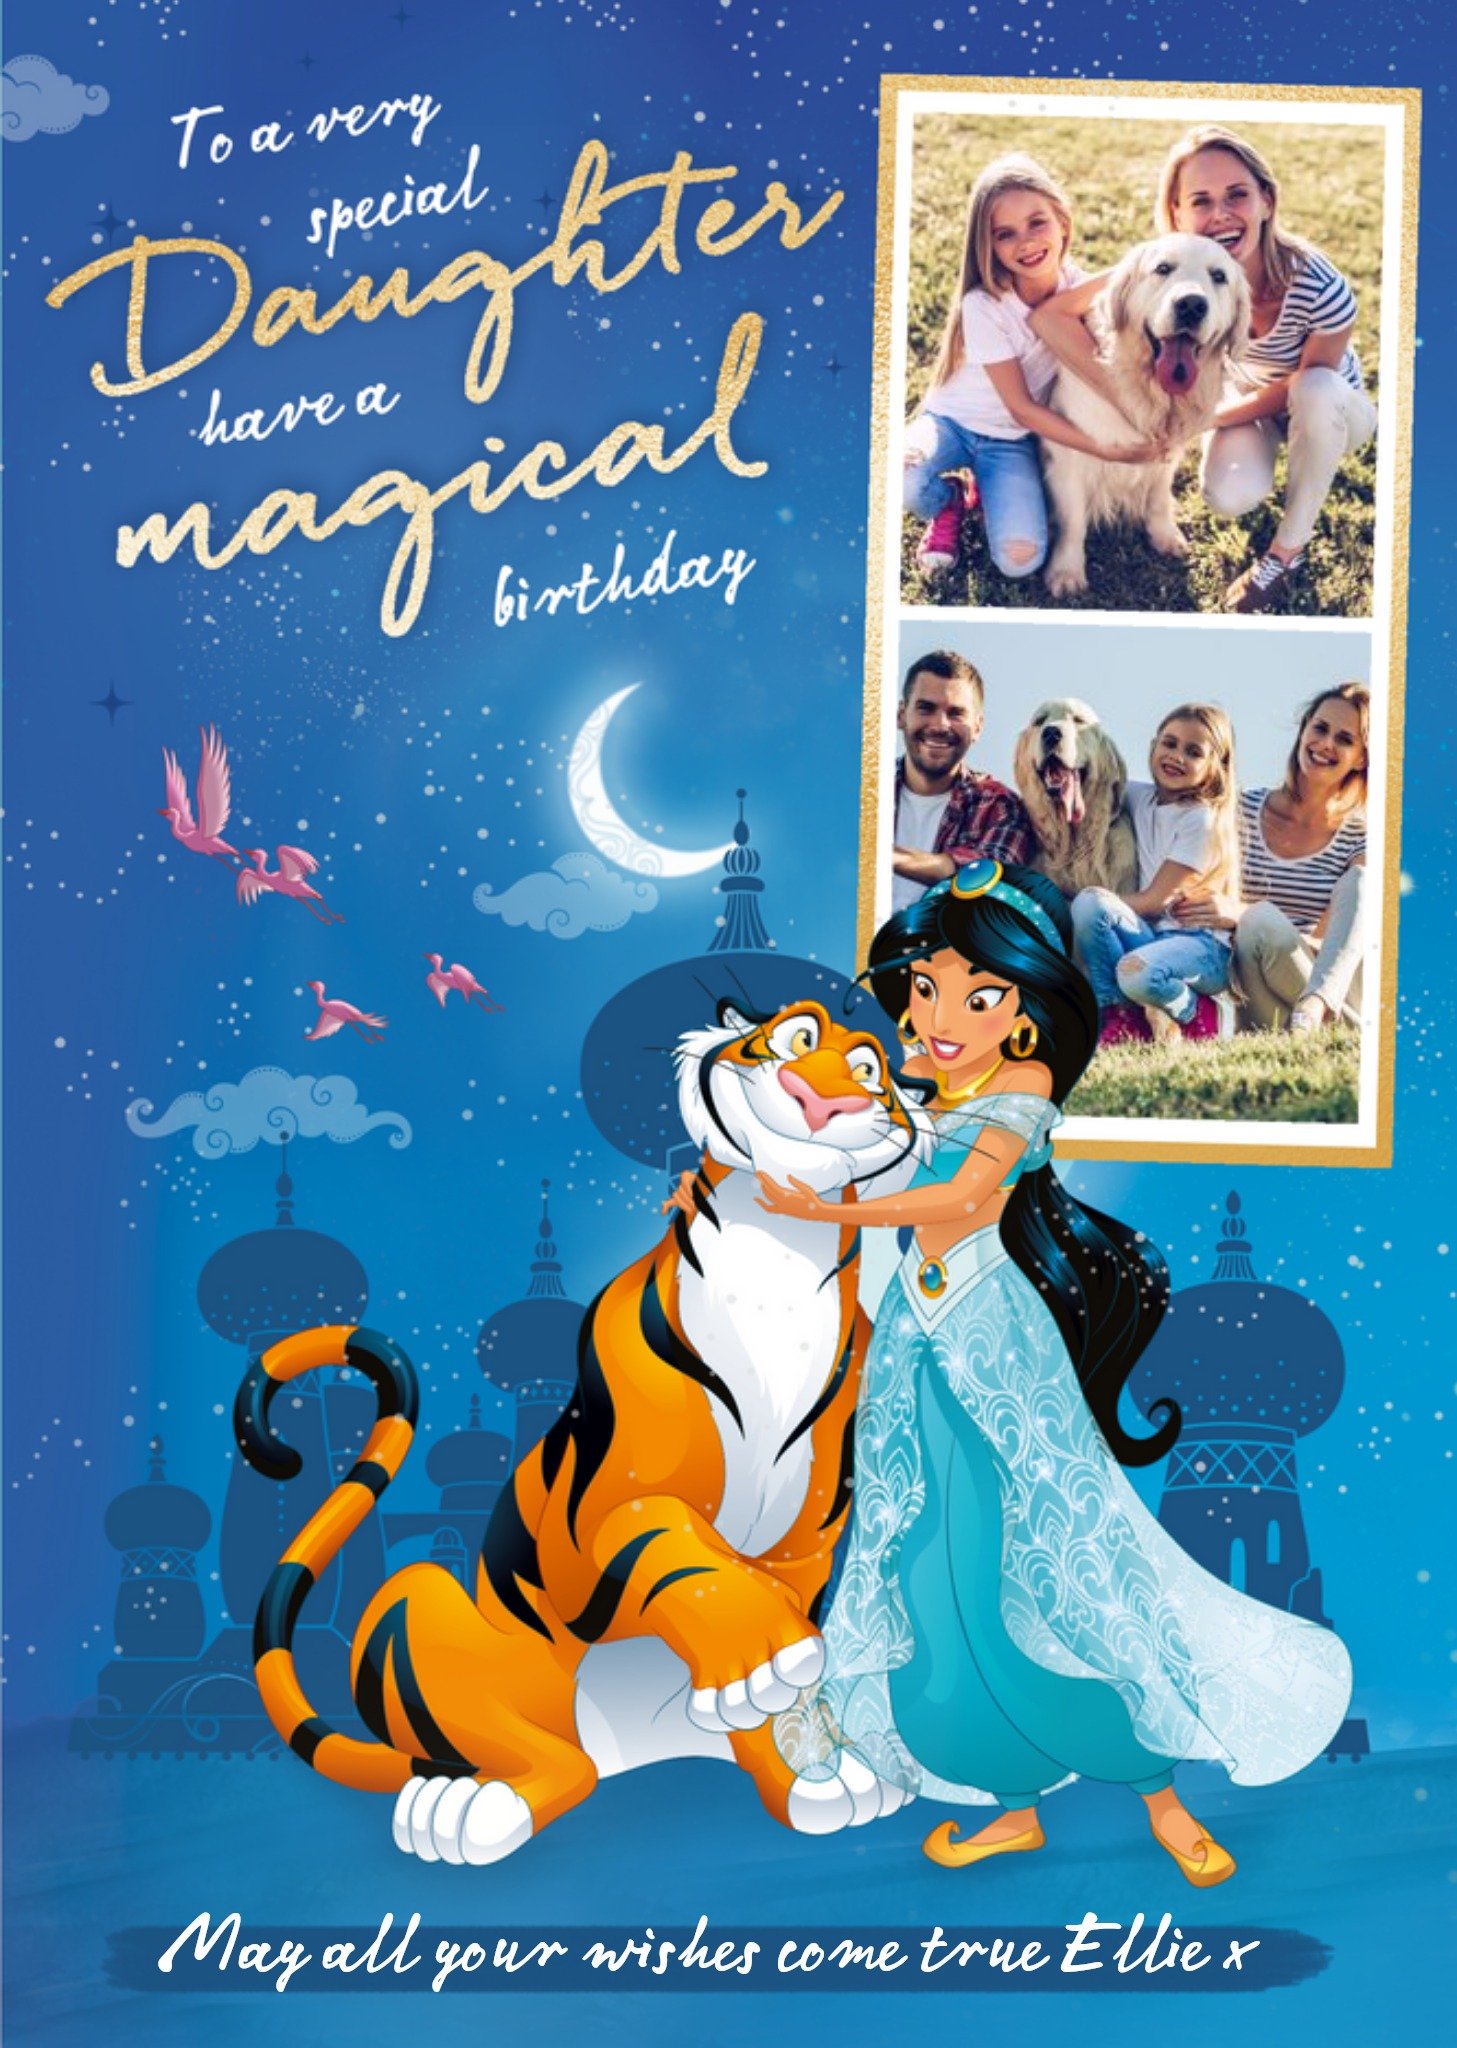 Disney Aladdin Photo Upload Birthday Card - To A Very Special Daughter Ecard